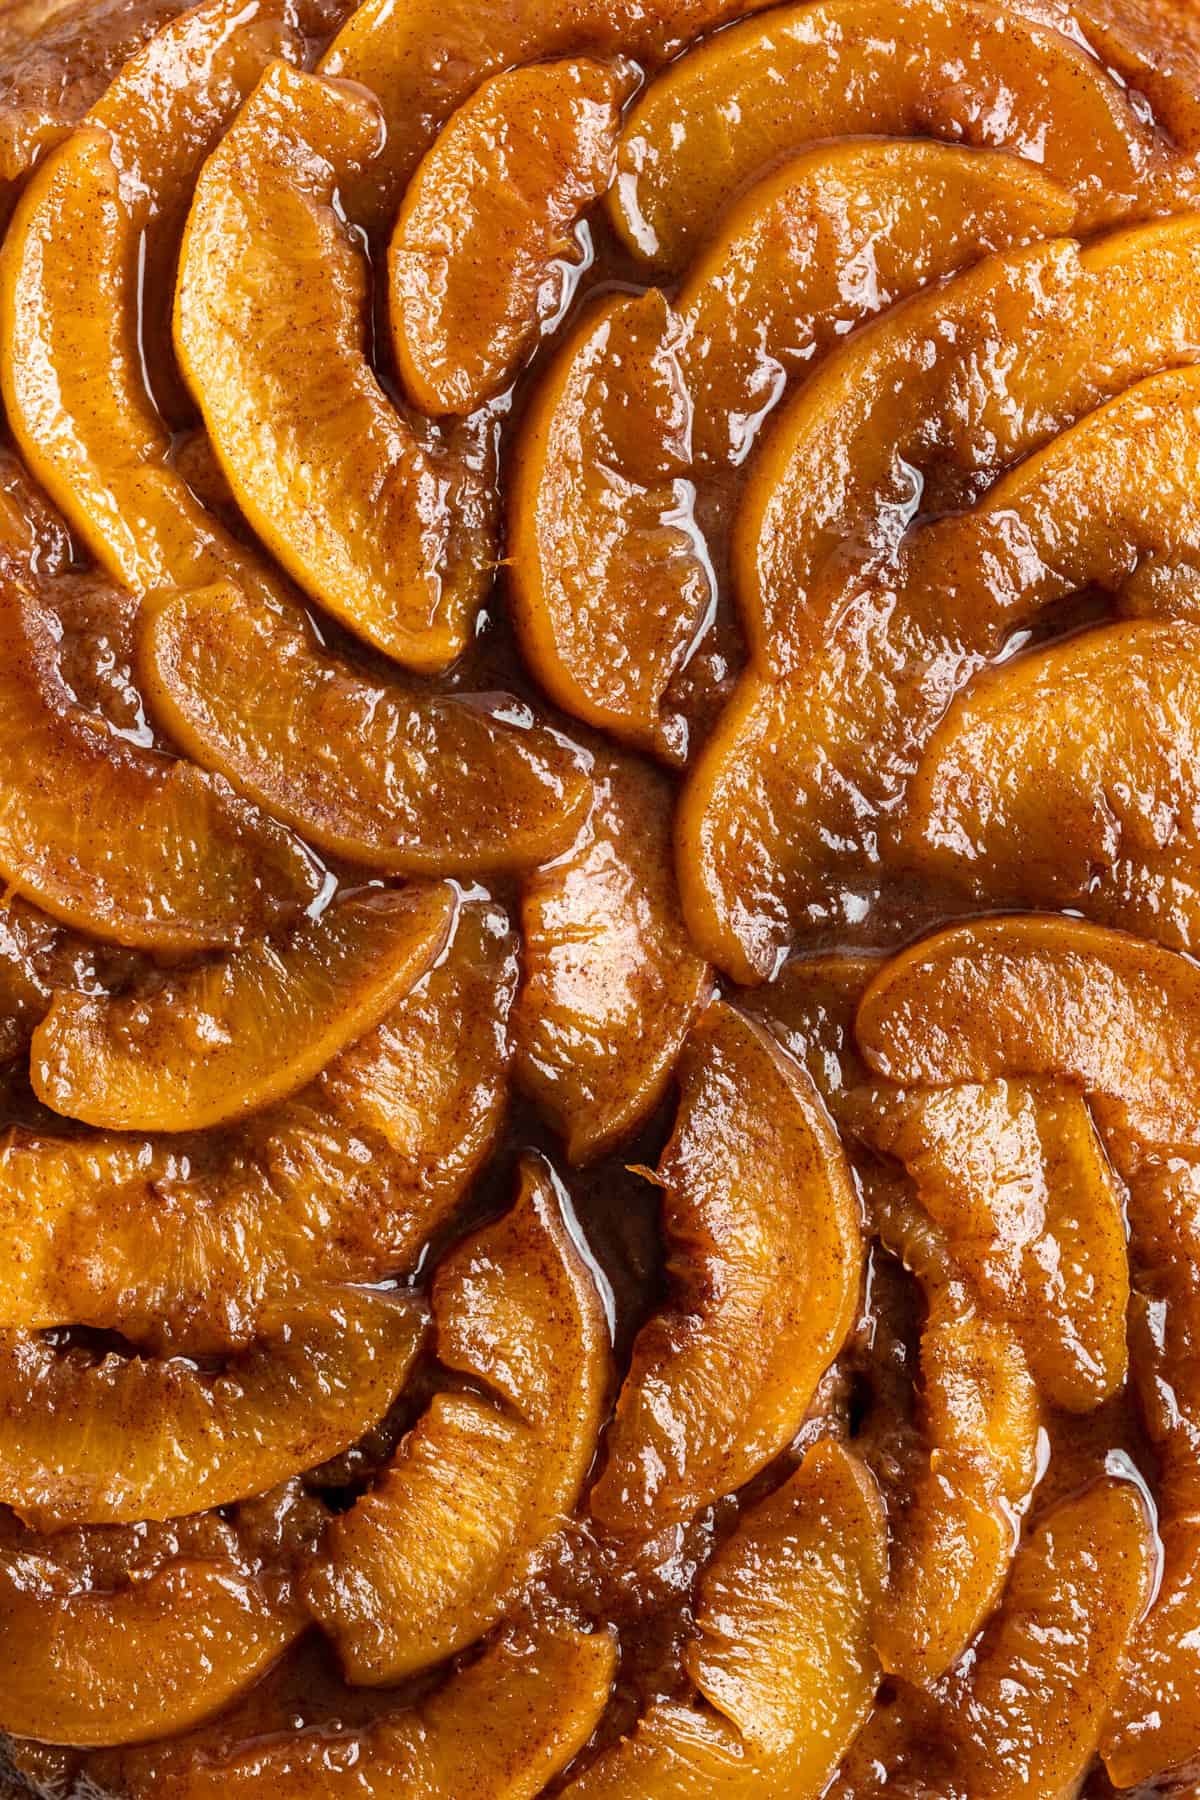 A close up of decorative peaches caramelized on a cake